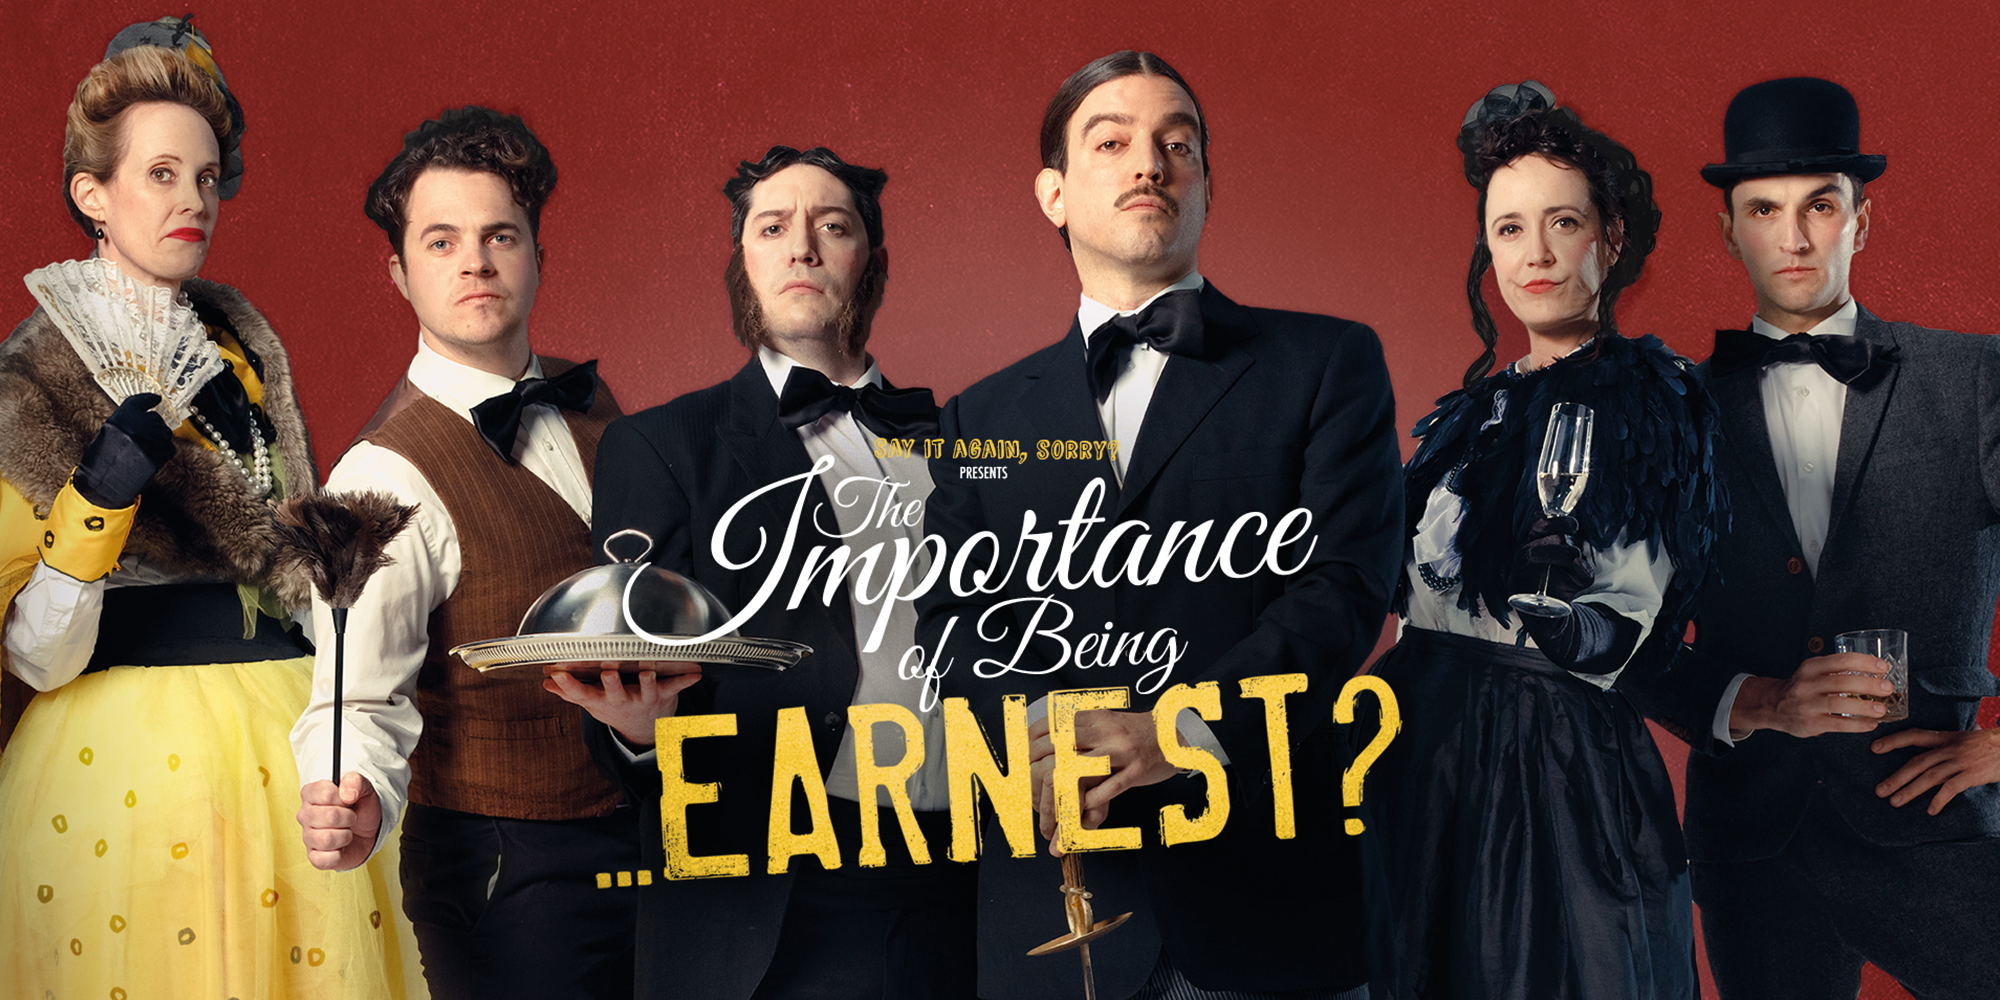 the importance of being earnest movie